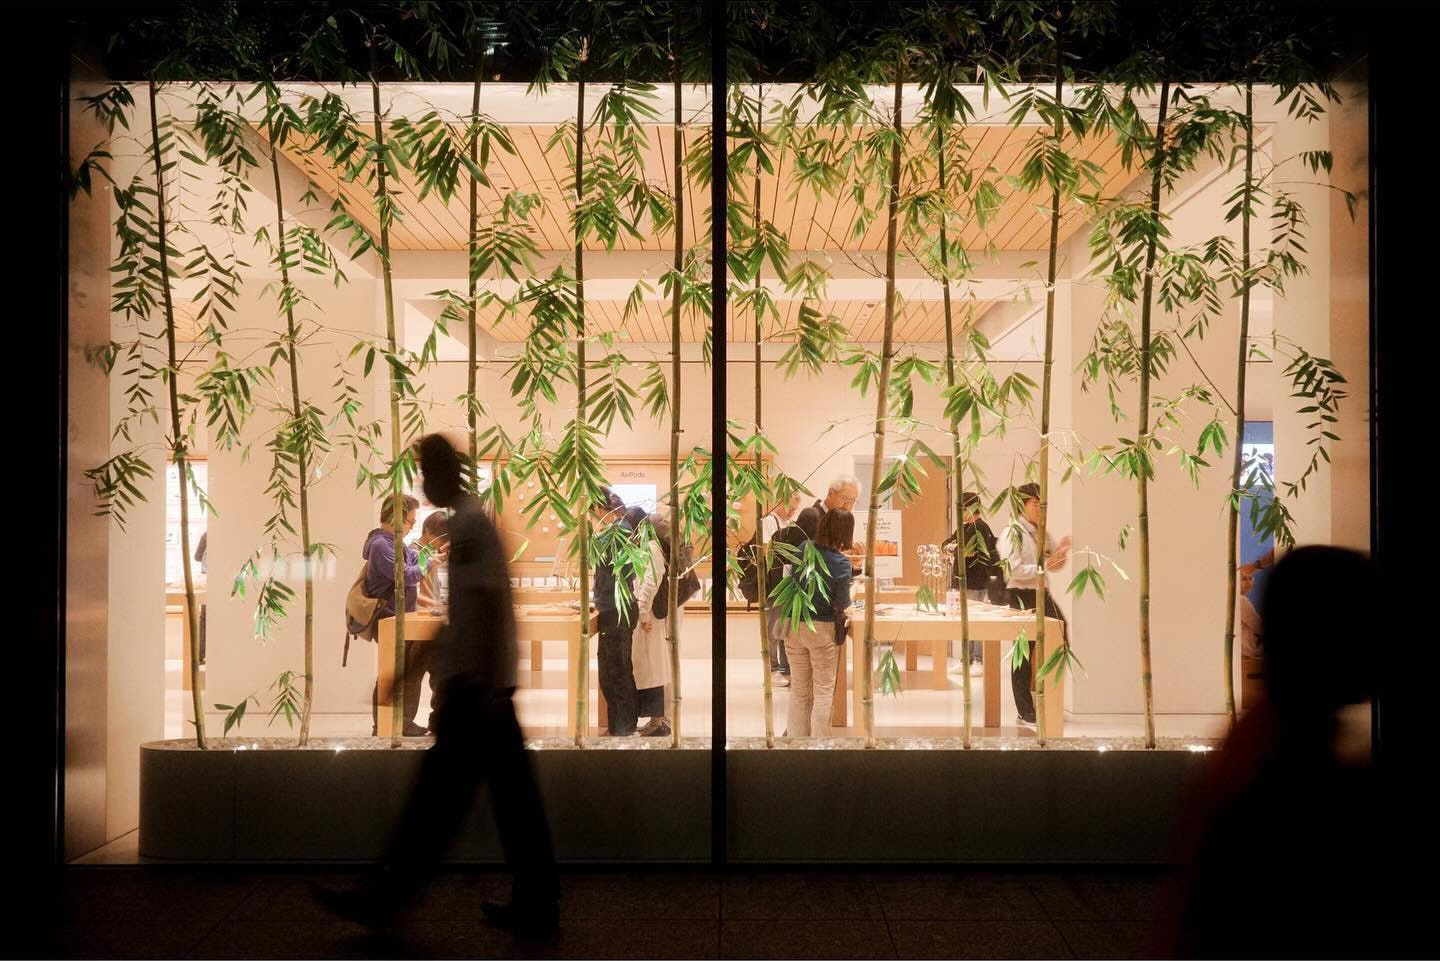 The windows of Apple Marunouchi at night. Silhouettes of bamboo and passersby obscure the glass.